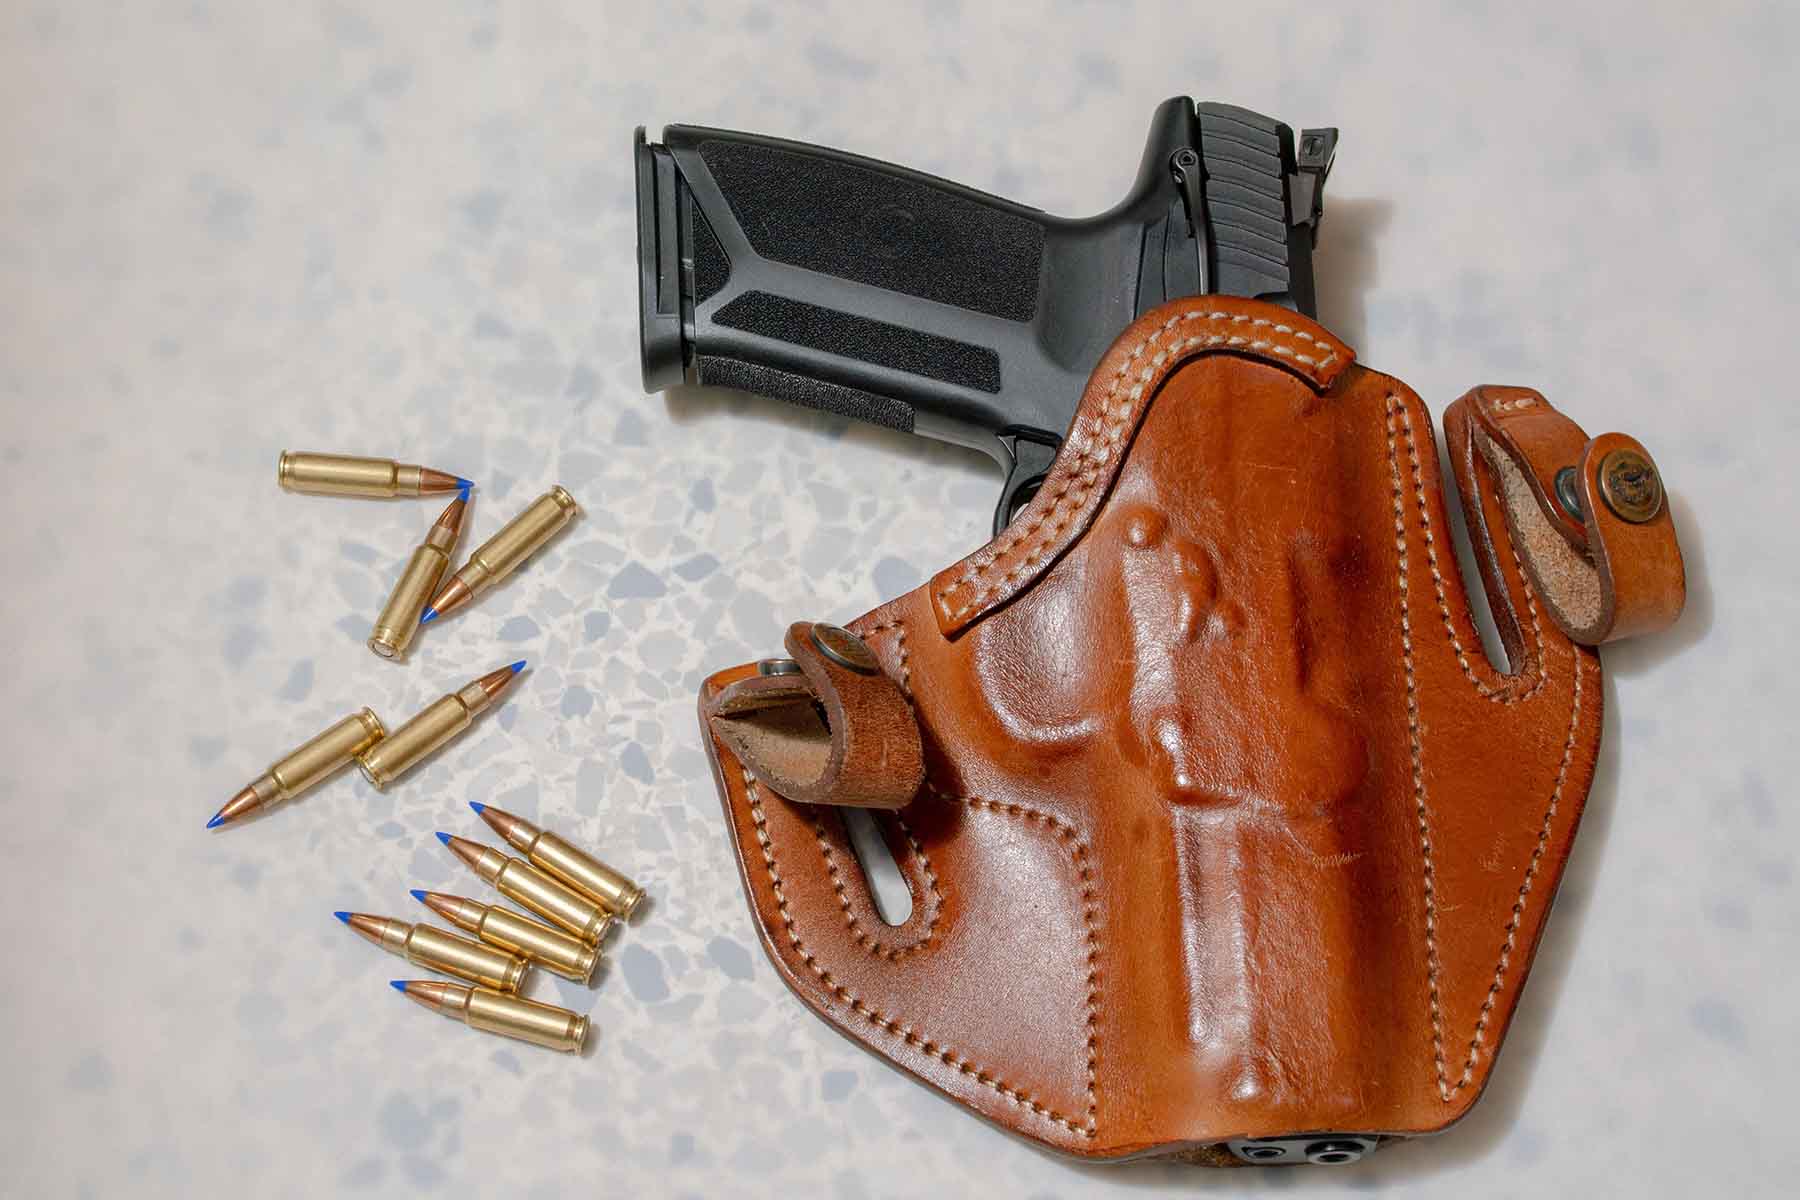 A black handgun inside of a brown leather holster next to several bullets.